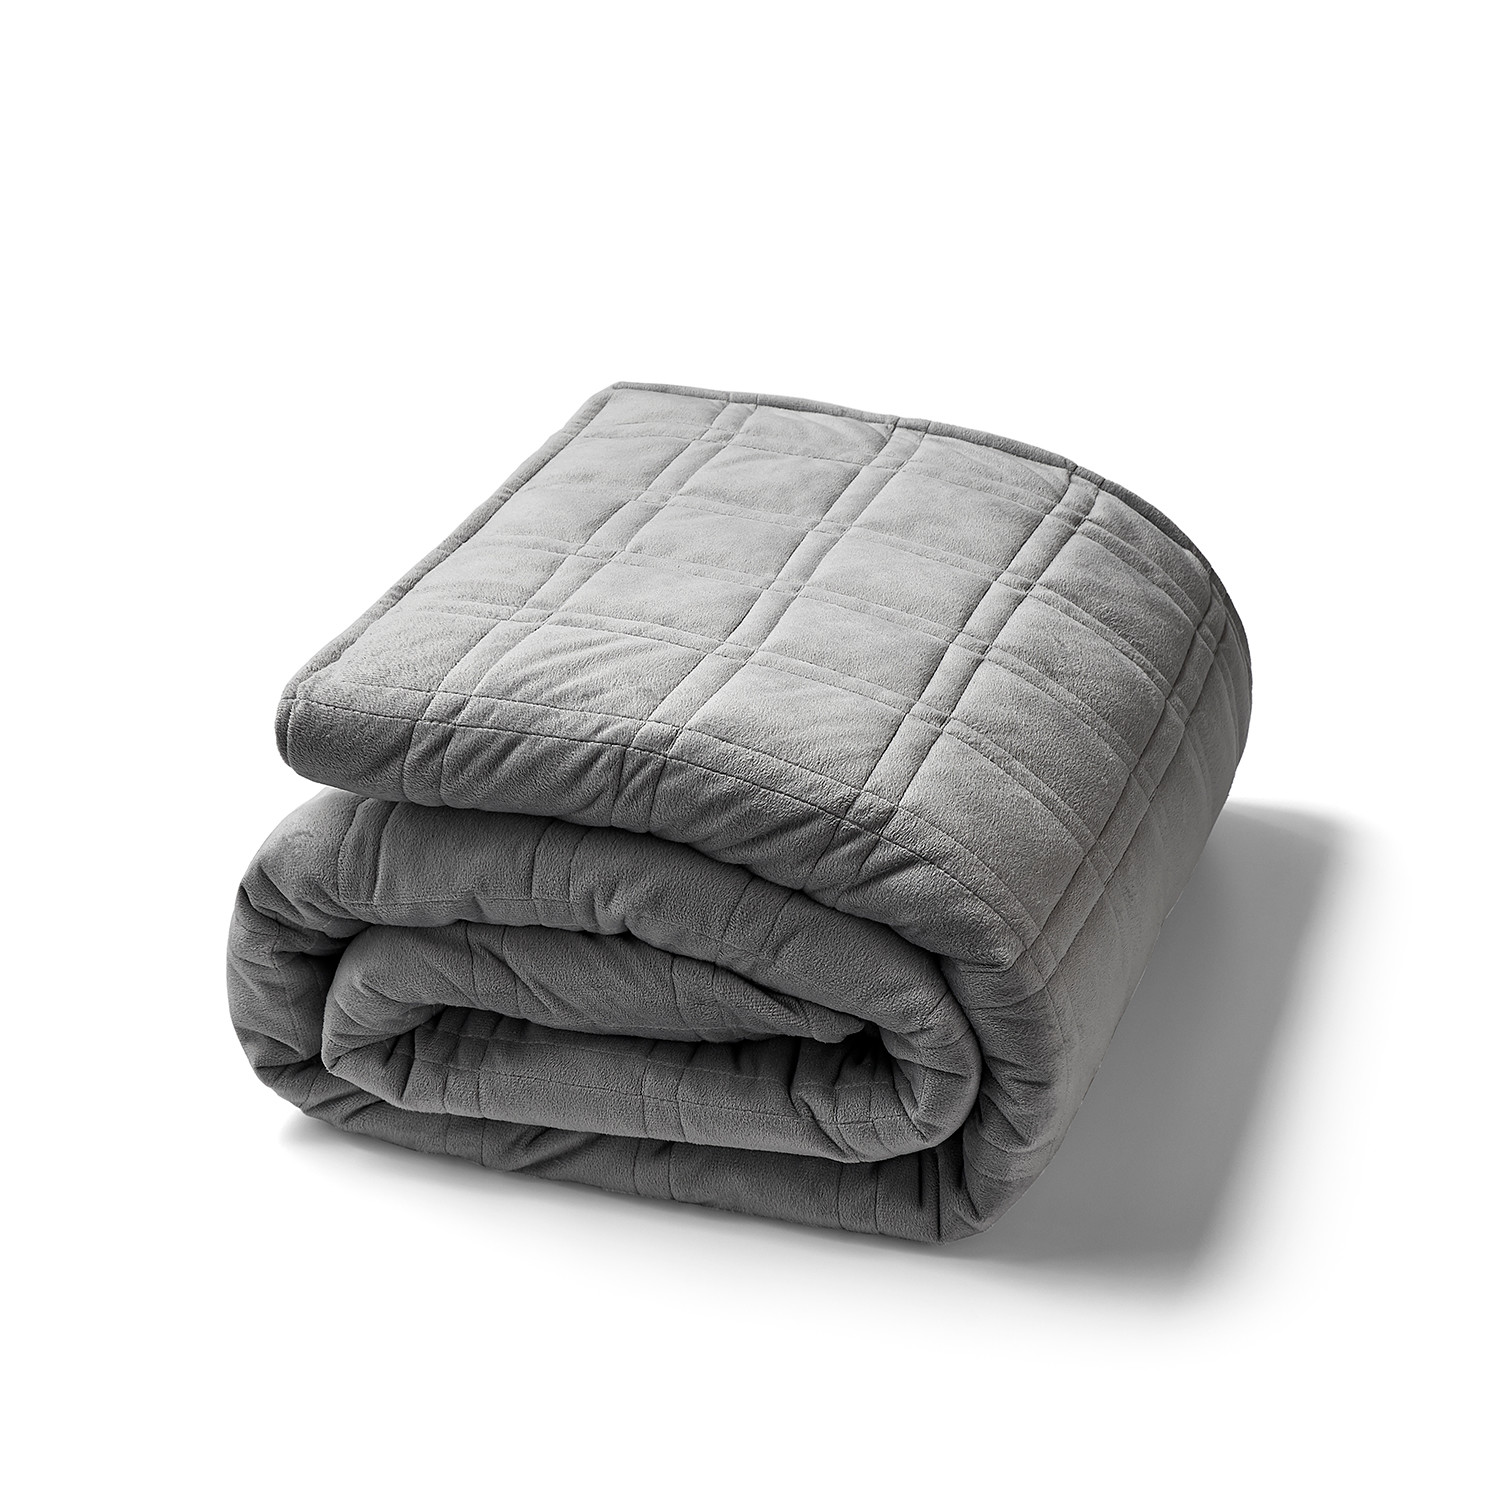 T233 Mink Weighted Blanket + Gift Box (15Lbs Blanket) - Mélange Home